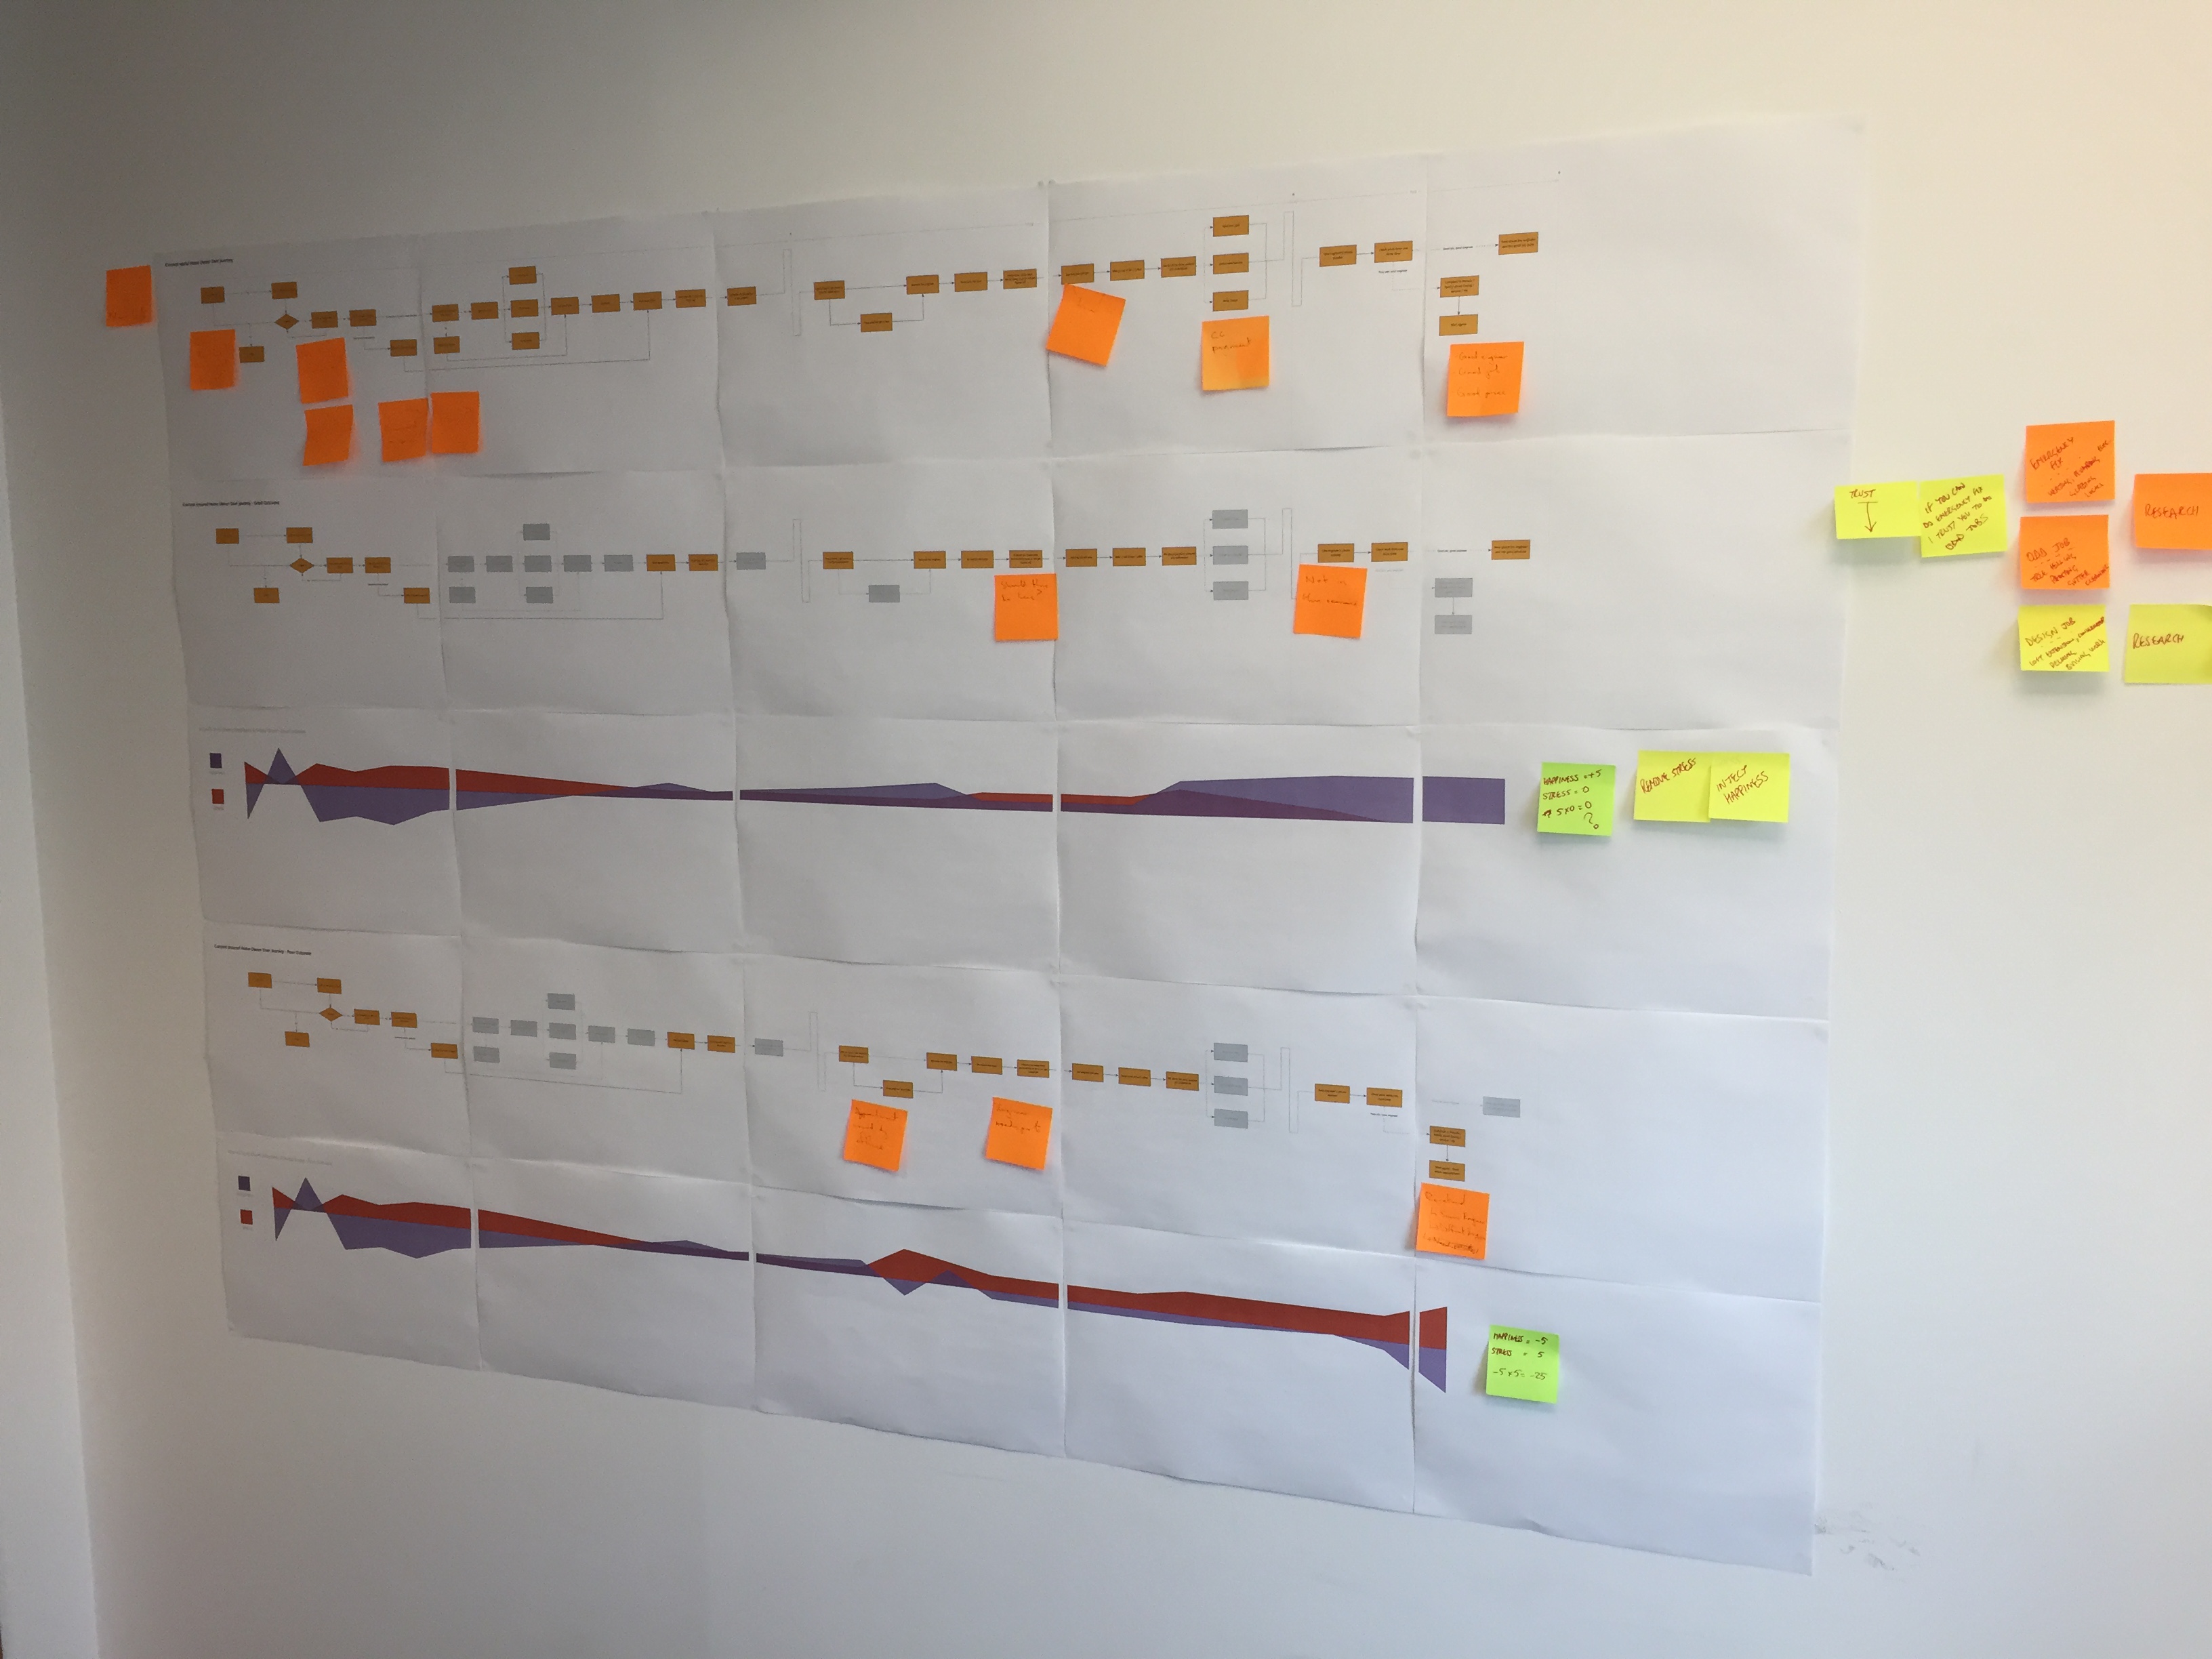 Photo of printed out Customer Journey map on an office wall